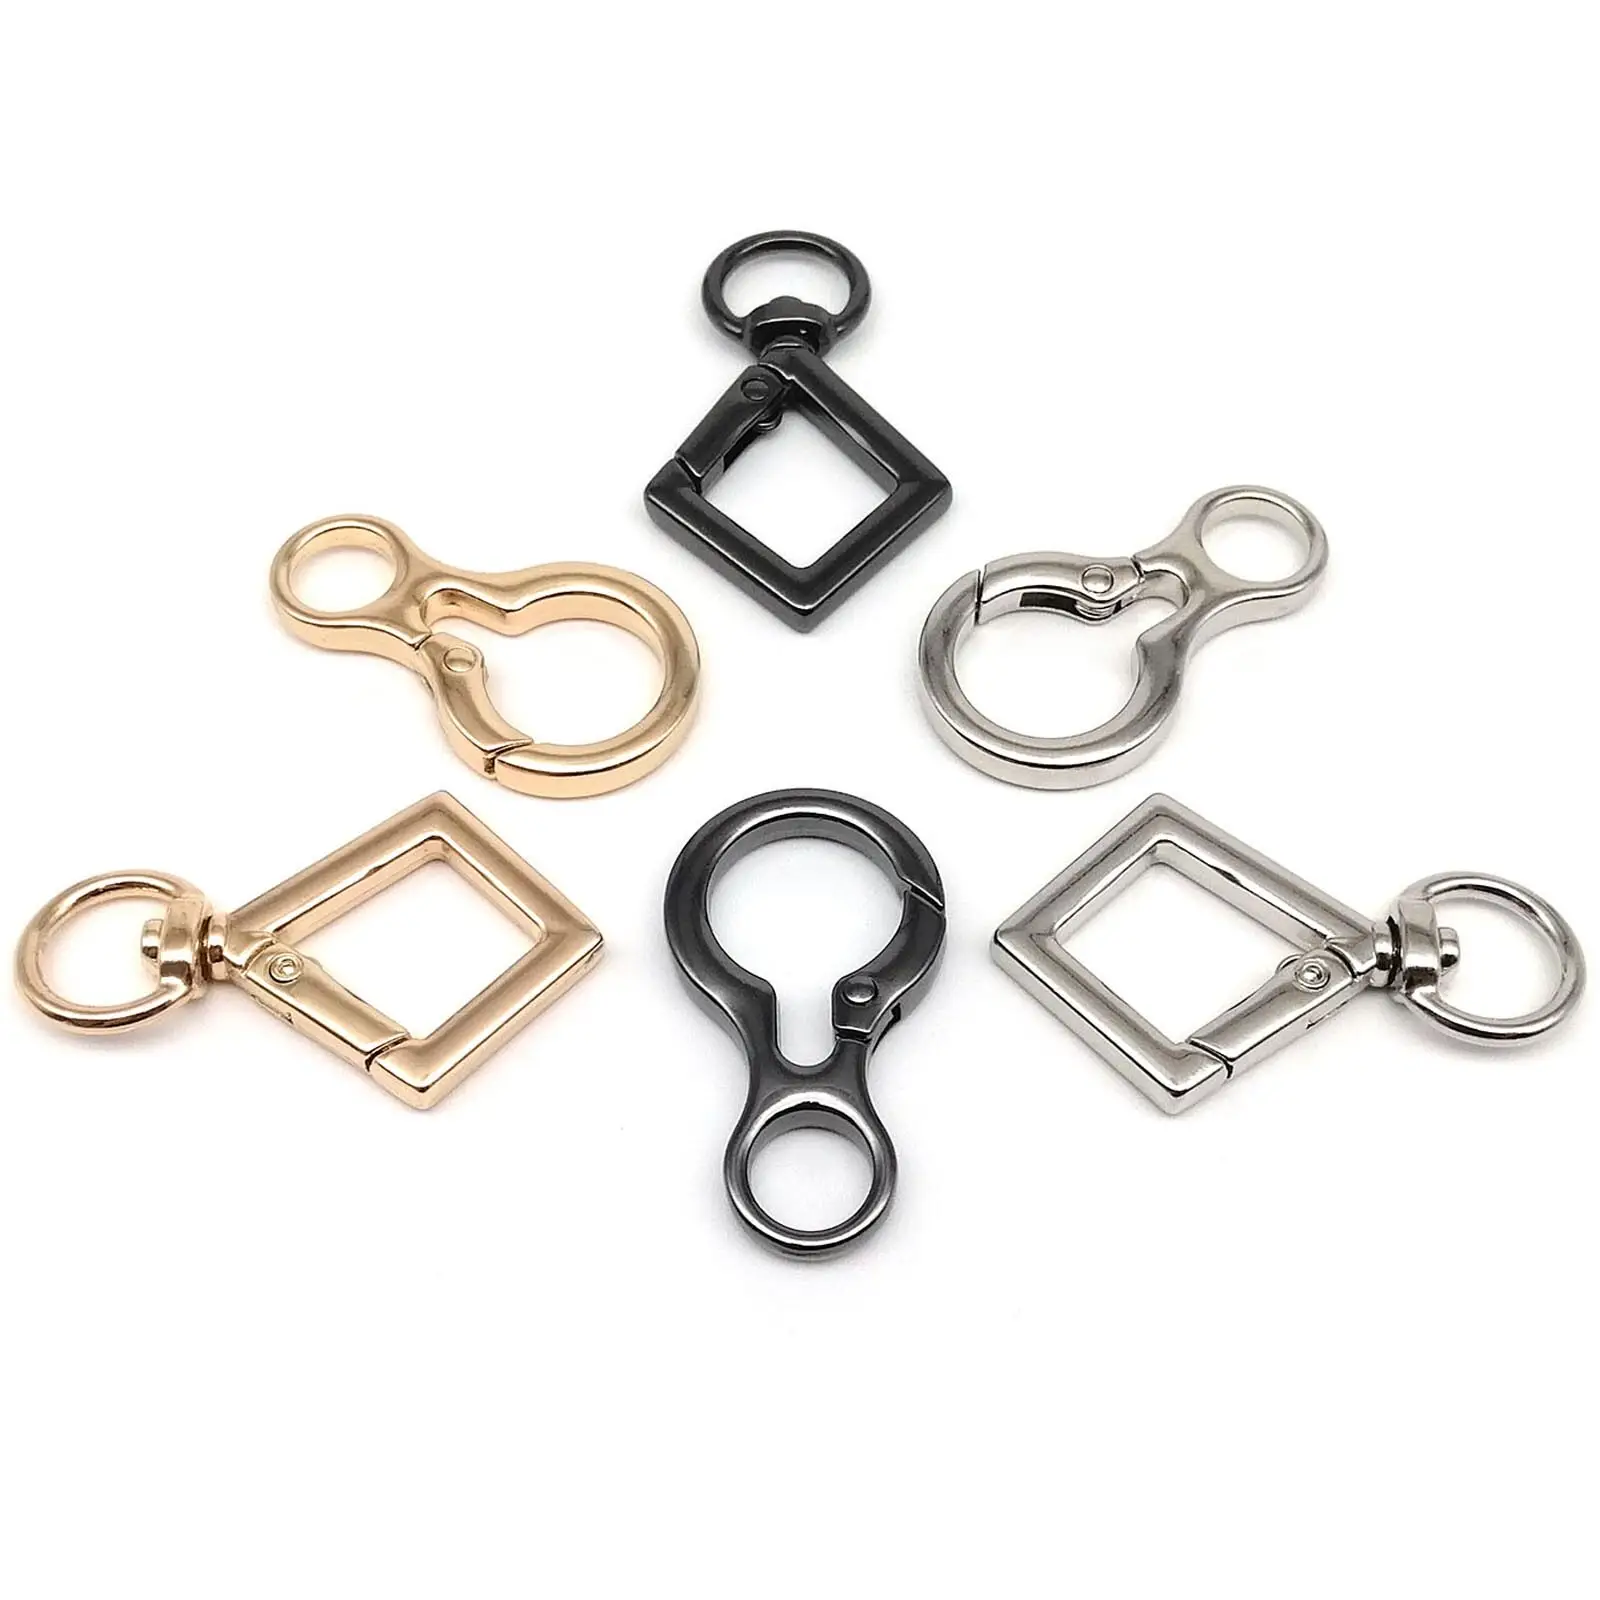 GRS Zinc Alloy High Quality Metal Swivel Snap Dog Buckle Clasp Pet Leash Hook Dog Chain Snap Clasp Trigger Hook